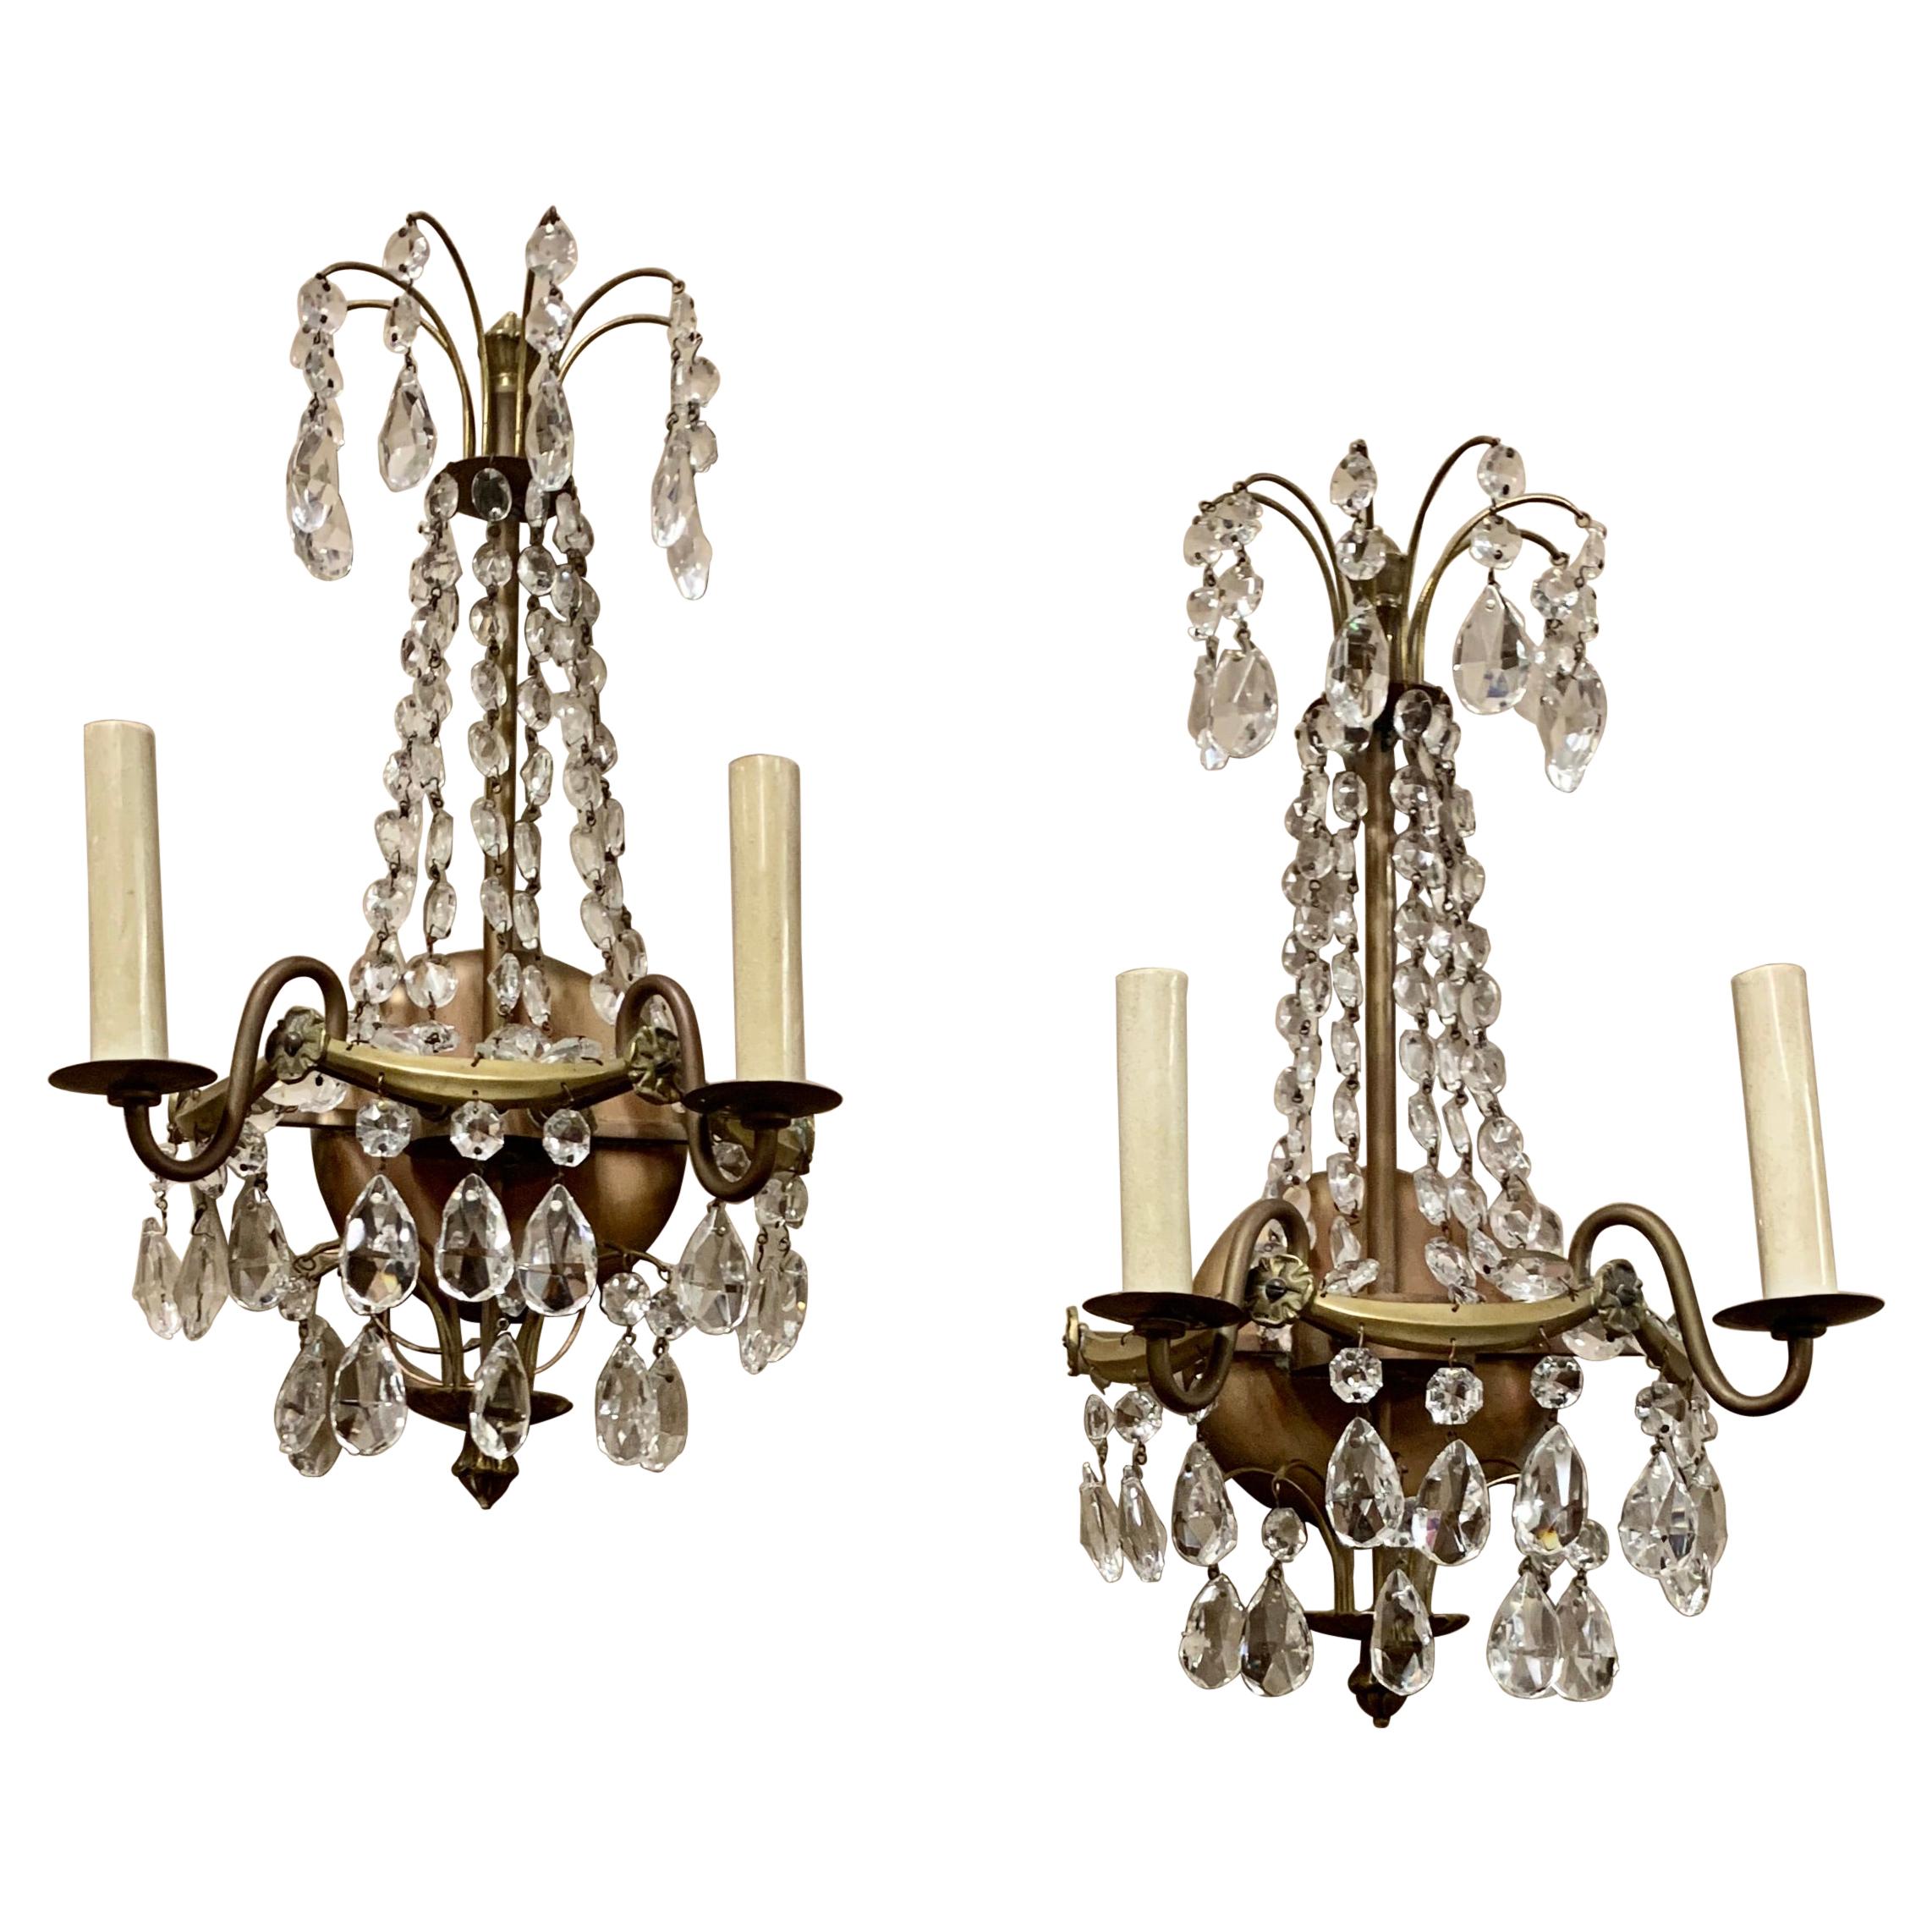 Two Light Swedish Gustavian Sconces in Crystal & Bronze, A Pair For Sale